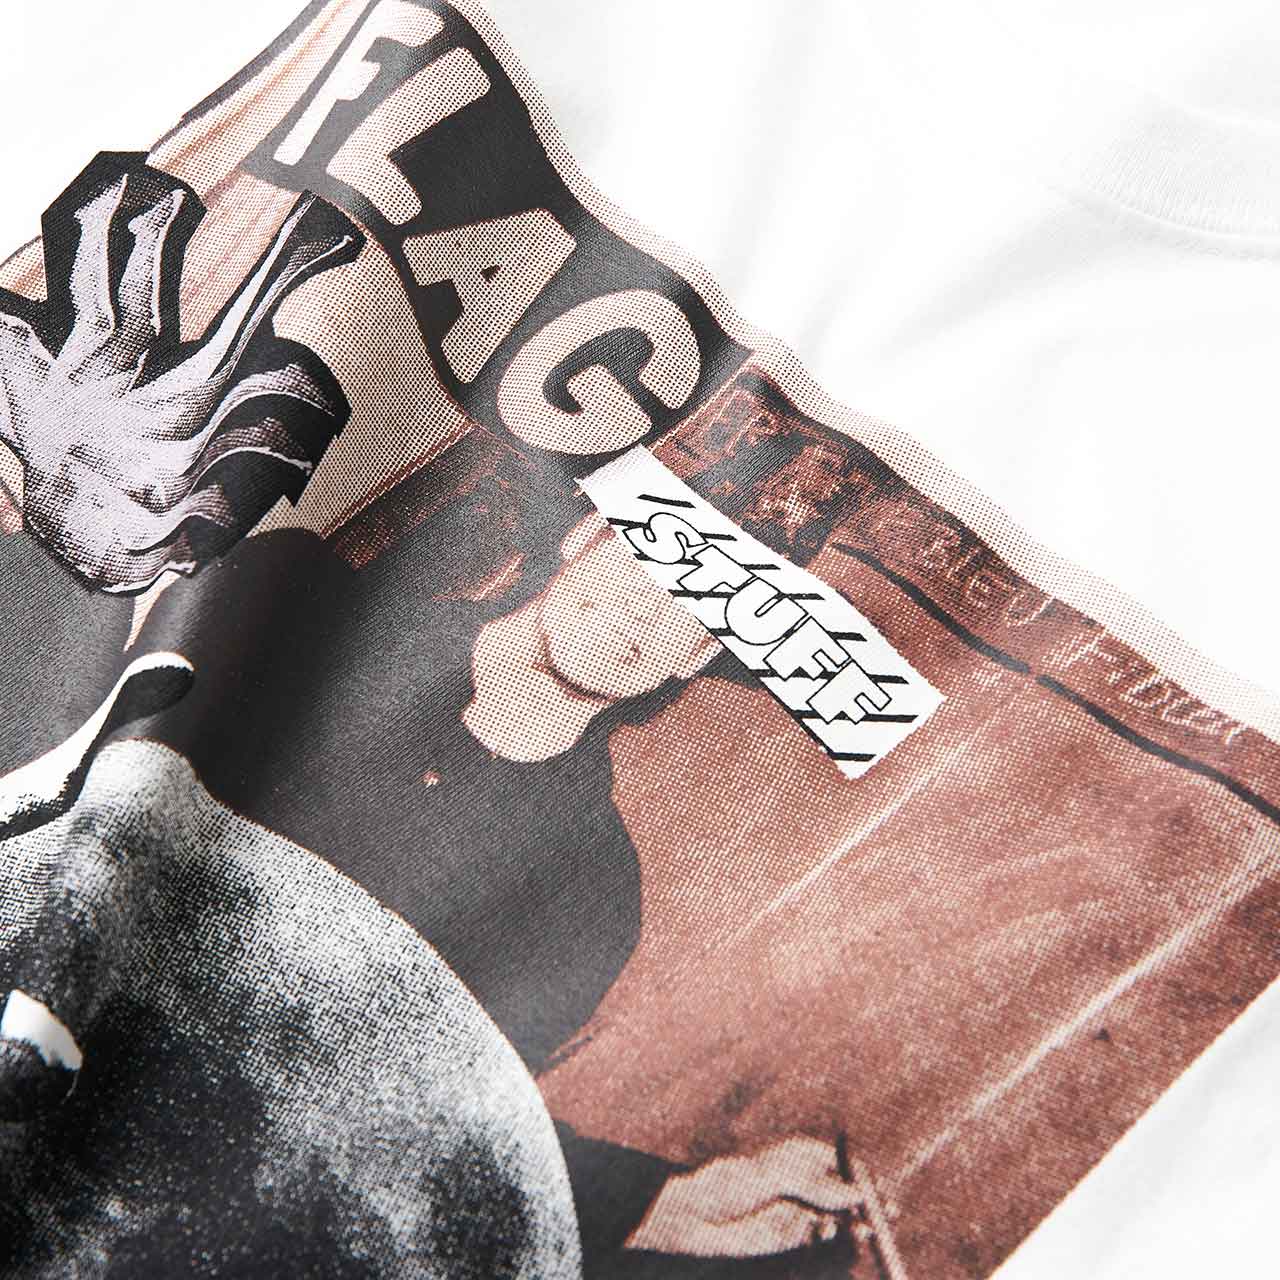 flagstuff "cut up" s/s tee (white) - 20aw-fs-78 - a.plus - Image - 5